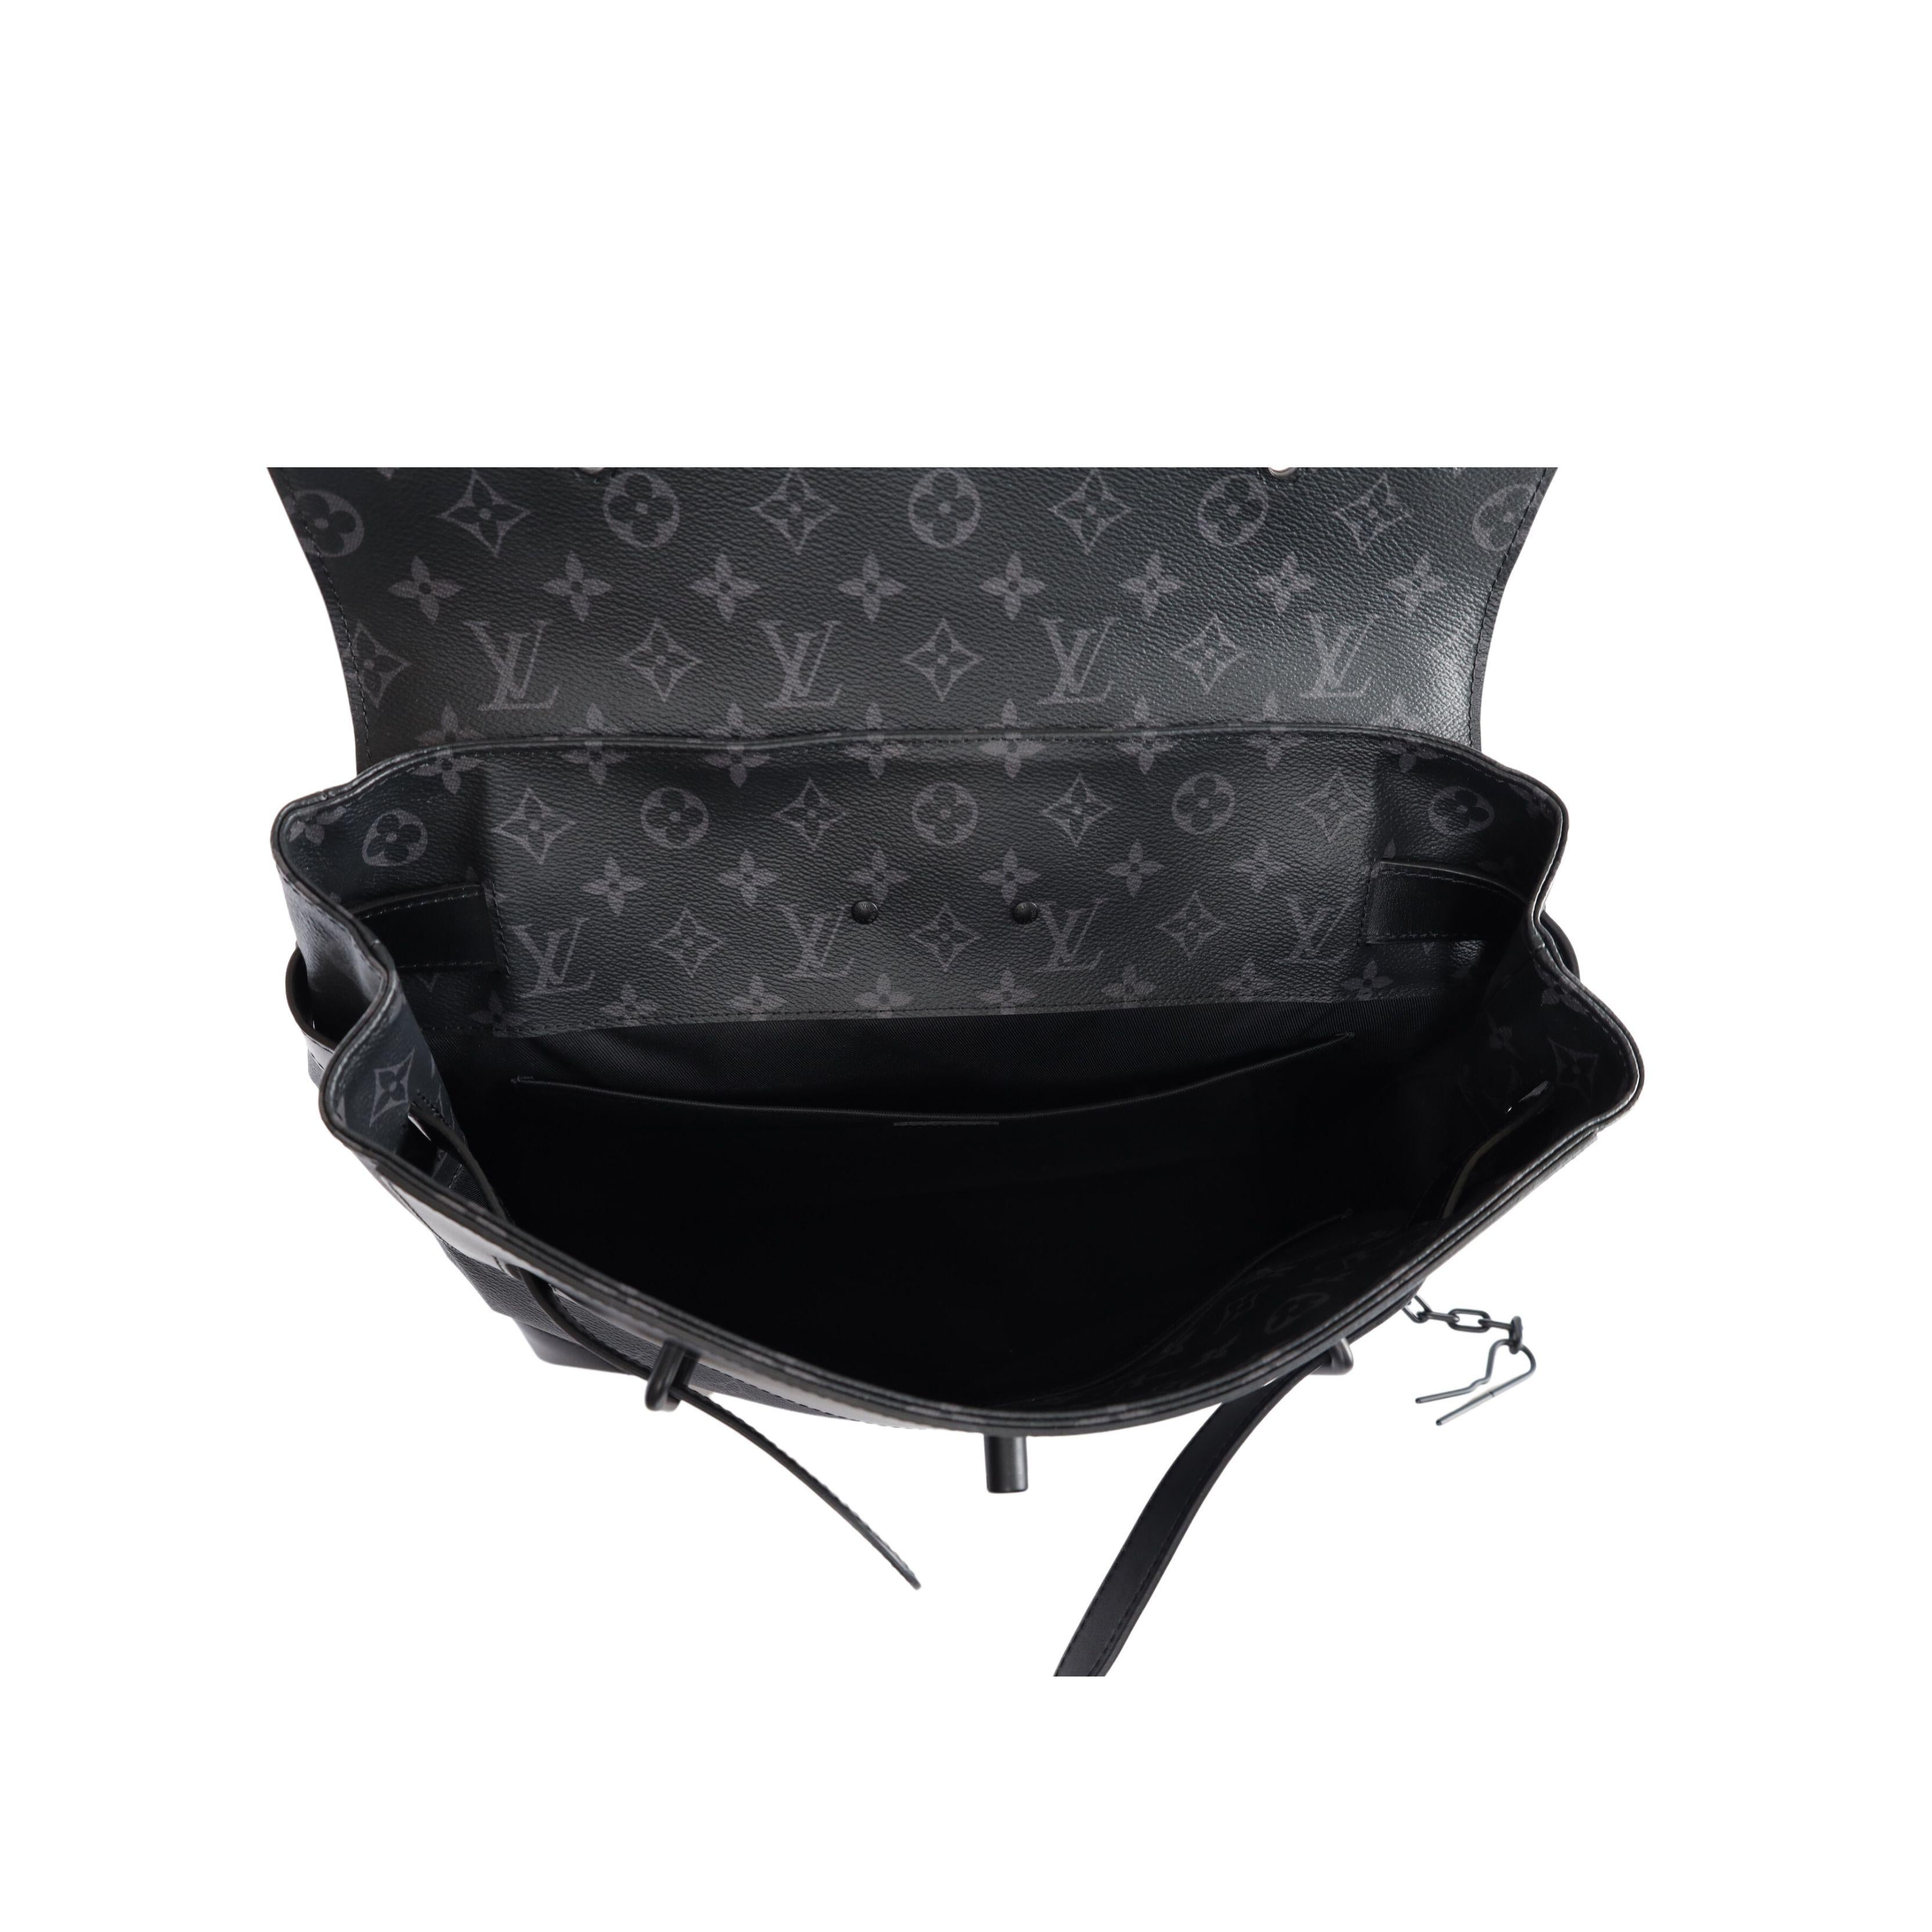 The Louis Vuitton Monogram Eclipse Steamer is a cutting-edge design from Virgil Abloh. Showcased on the Fall/Winter 2016 runway, the iconic LV monogram has been updated with a subtle black and grey palette for a sleek, modern look. With a new take